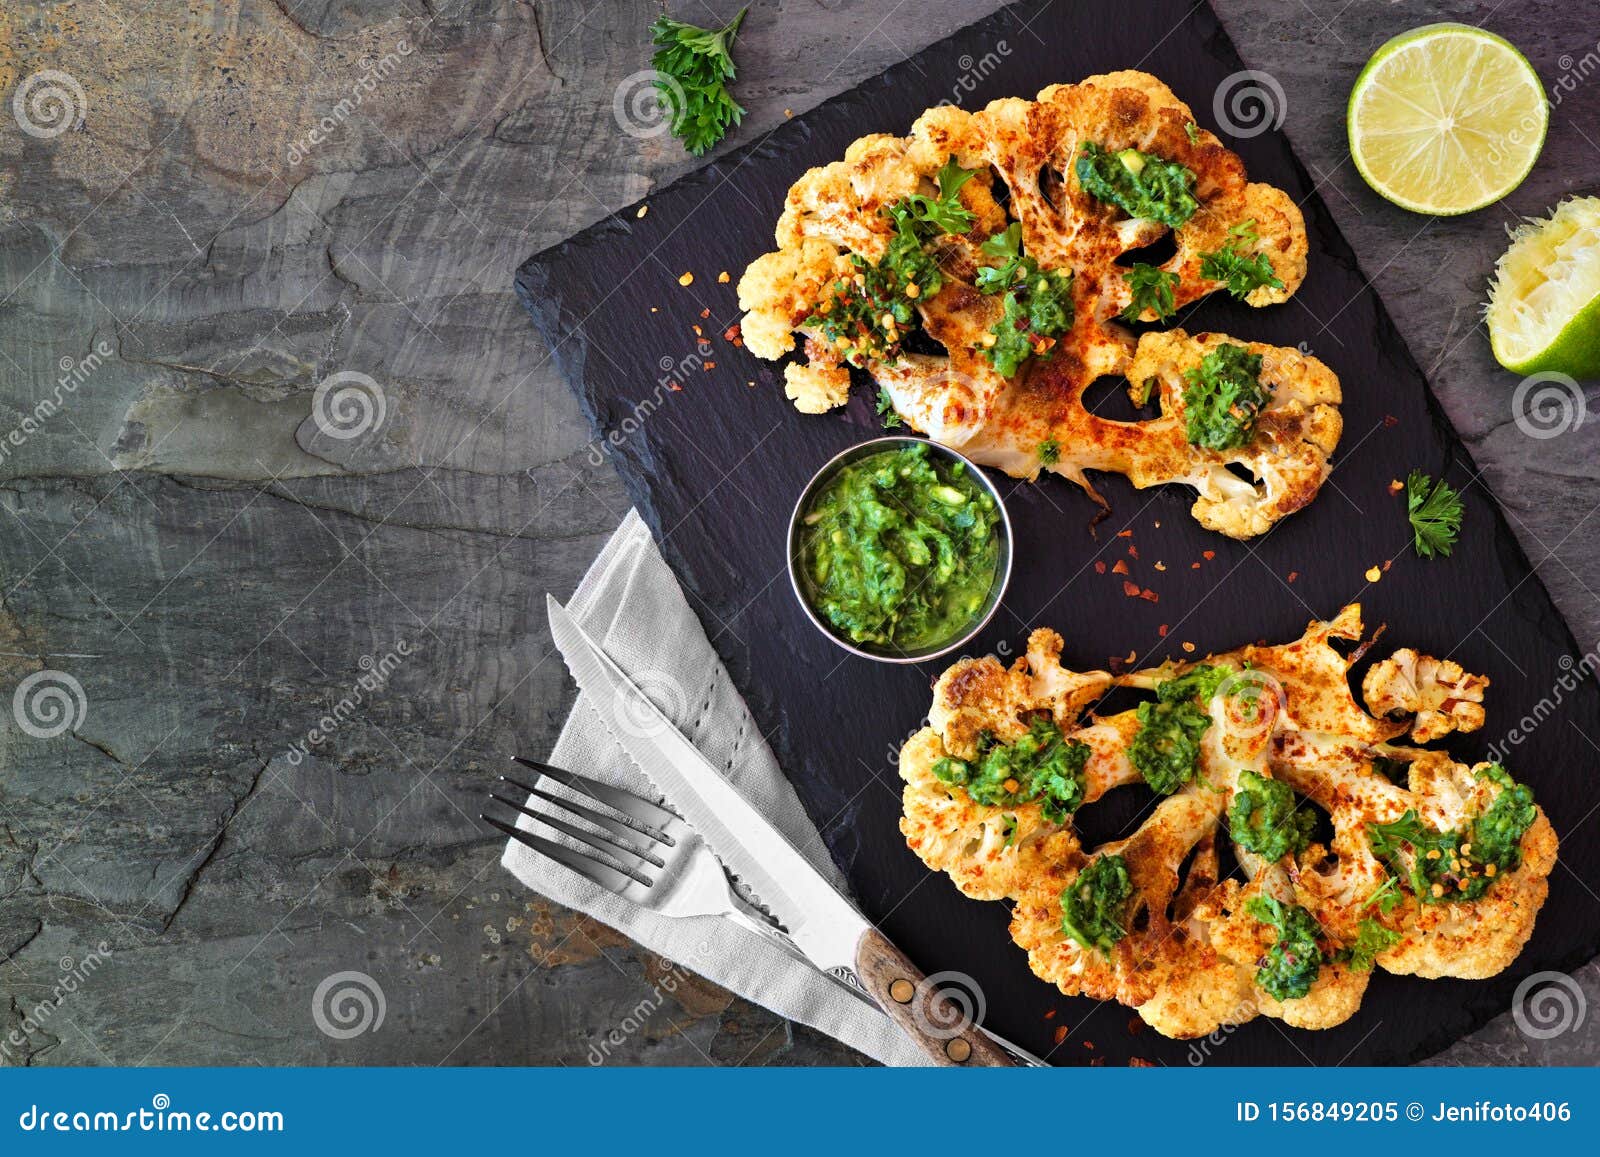 cauliflower steaks top view scene on a dark background, healthy plant based meat substitute concept